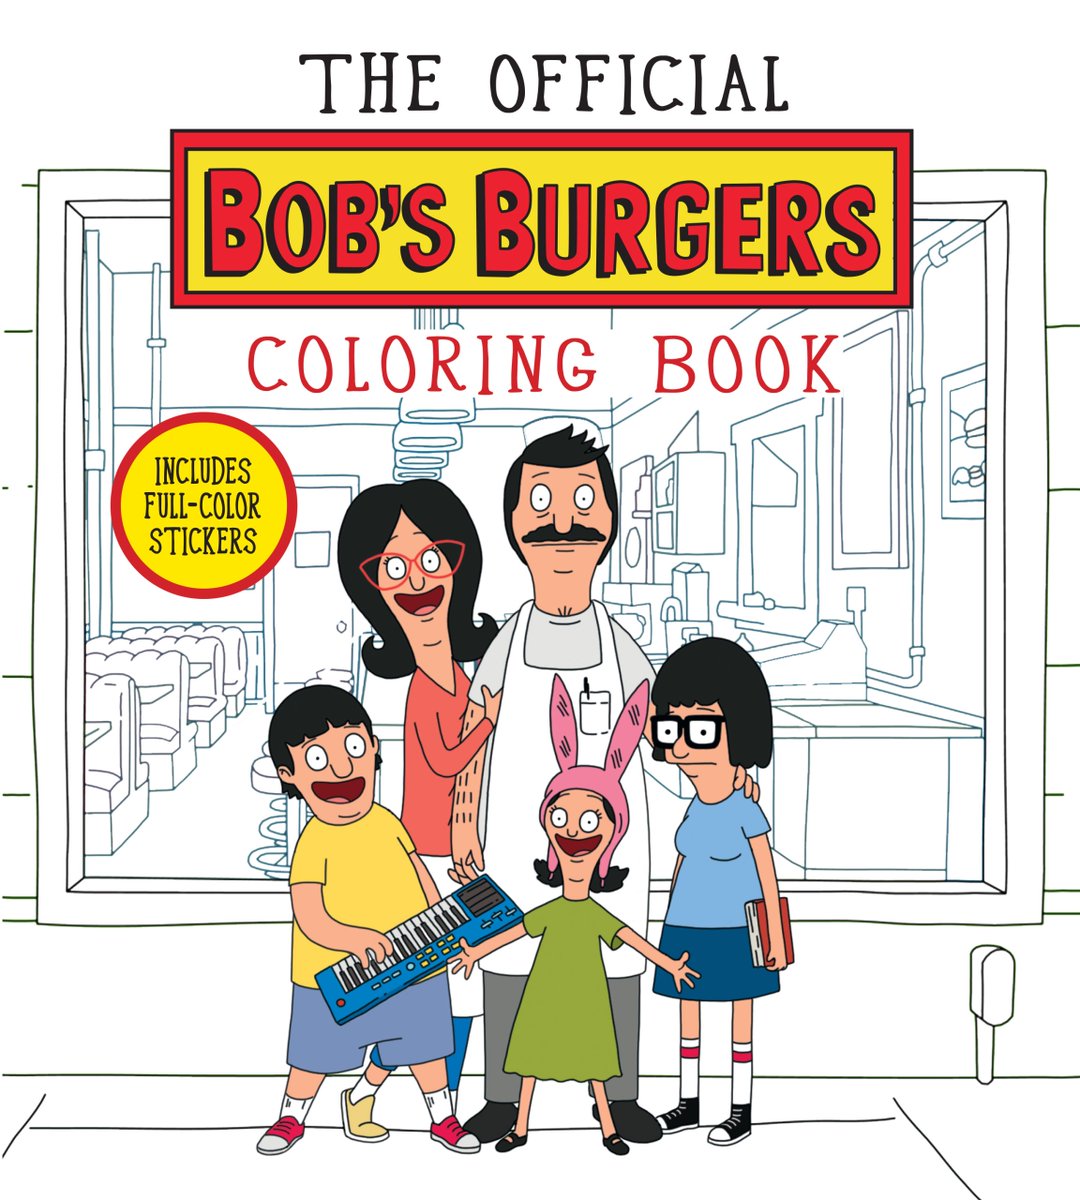 Raise your glasses—but not those glasses—because The Official Bob's Burgers Coloring Book is now available from @hyperionavebook! books.disney.com/book/the-offic…